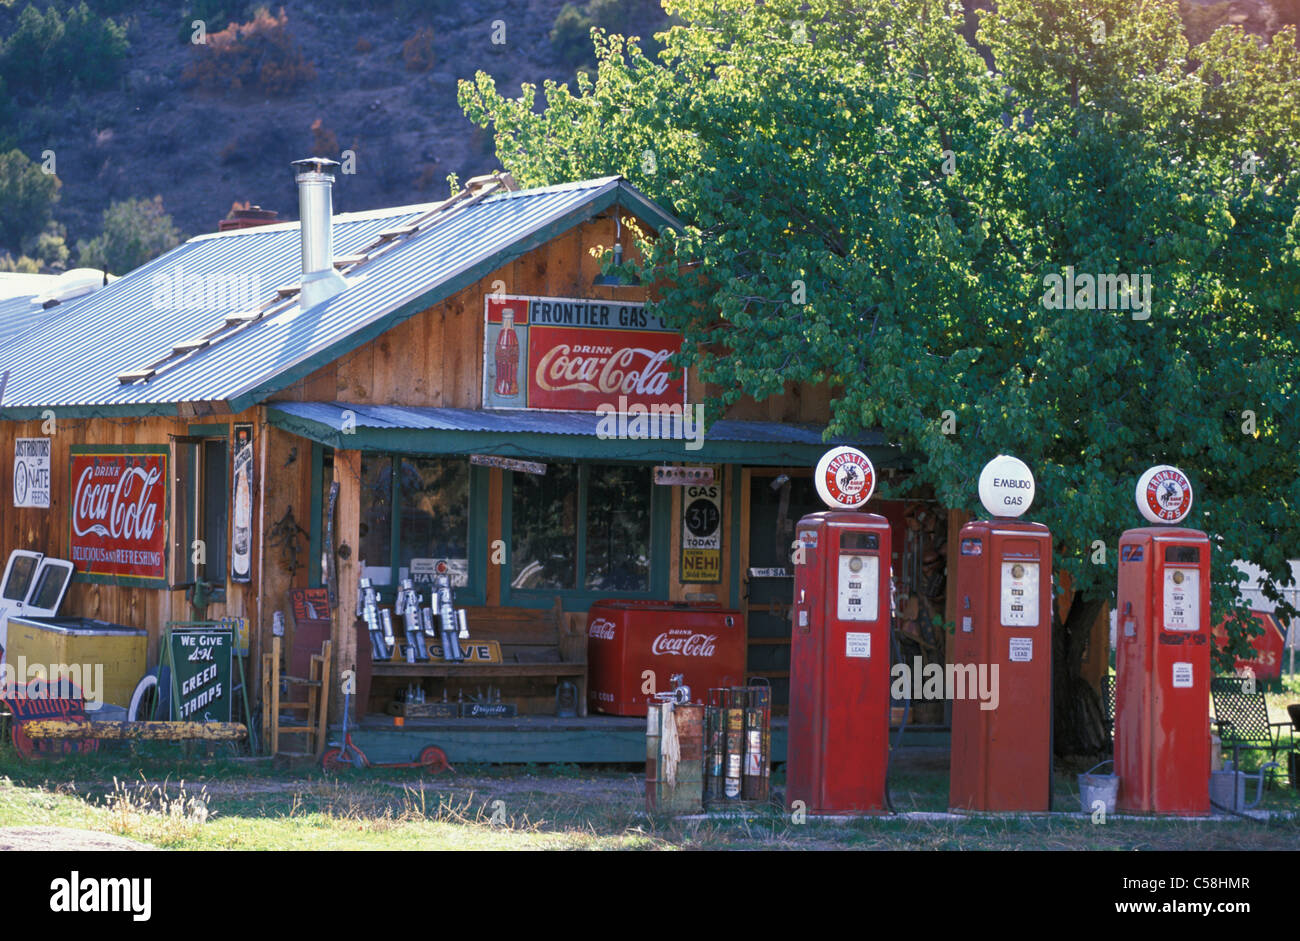 Frontier Gas Station, Historical, gas pumps, near Espanola, New Mexico, USA, United States, America, Stock Photo